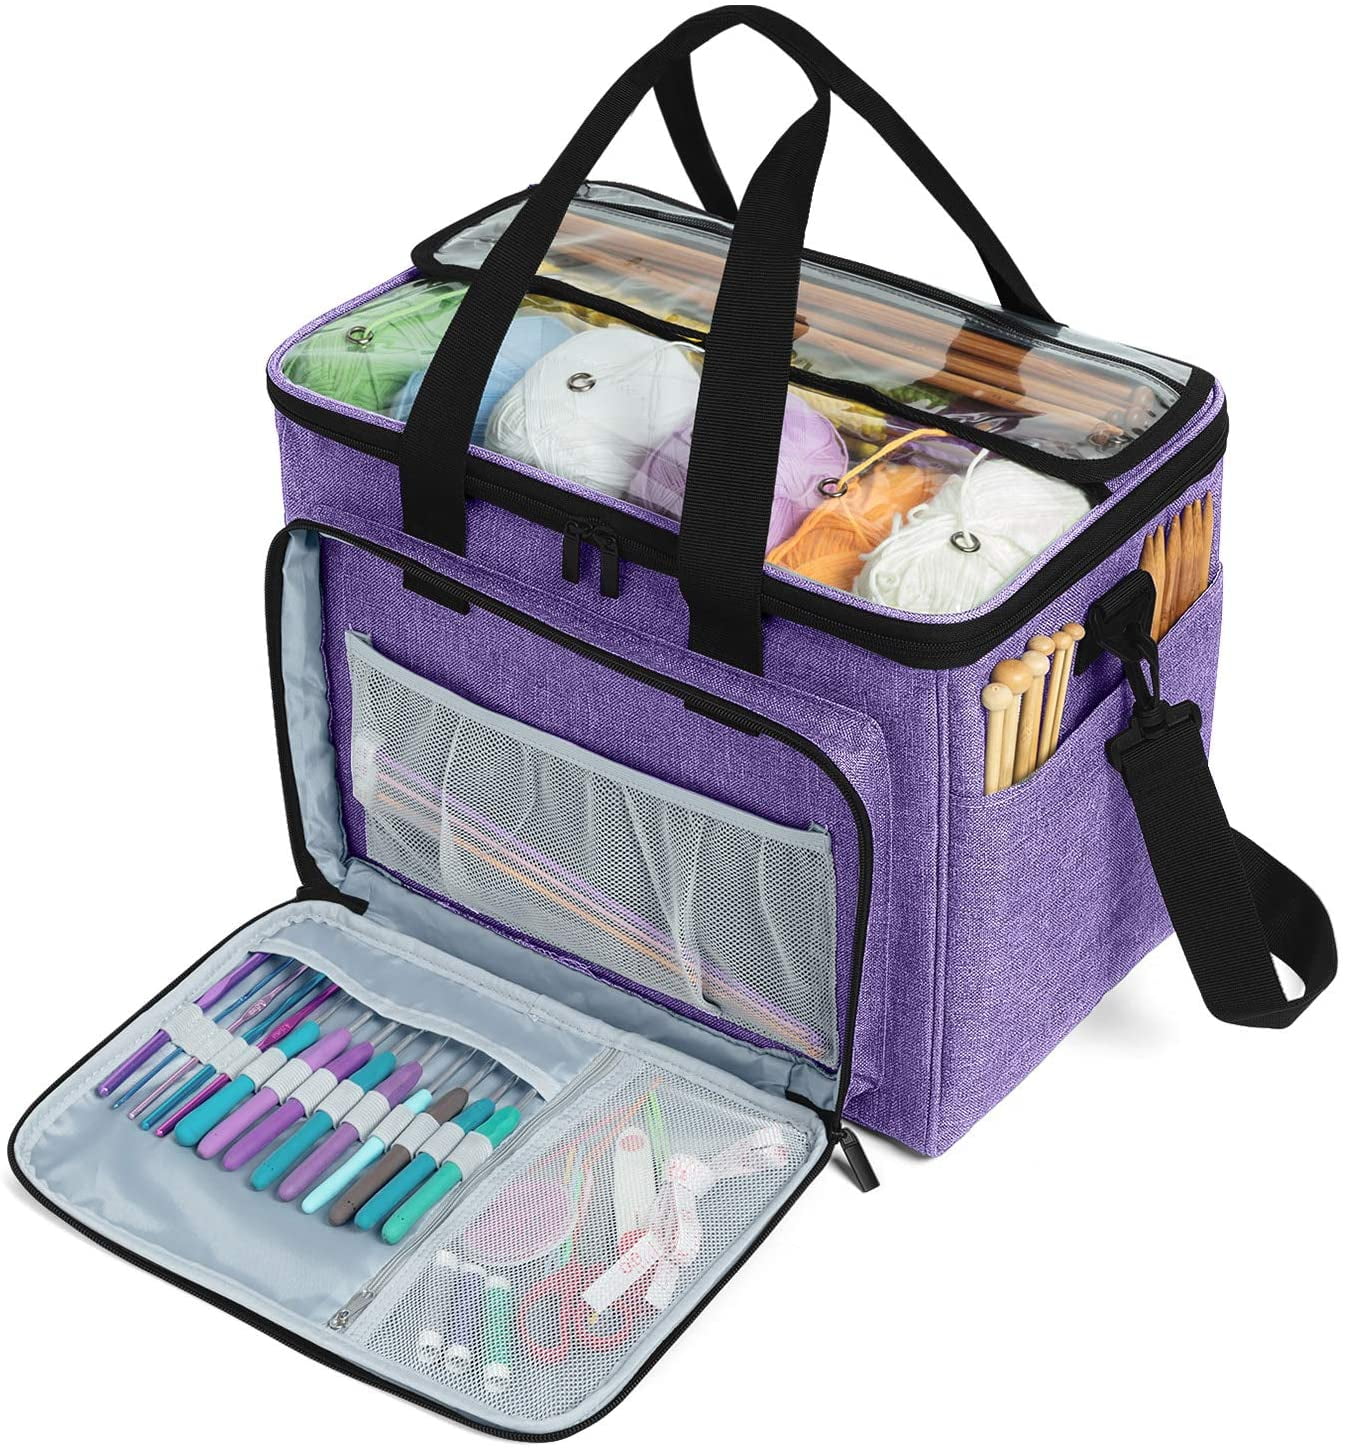 Buy Coopay Knitting Bag, Transparent Knitting Bag with Compartment